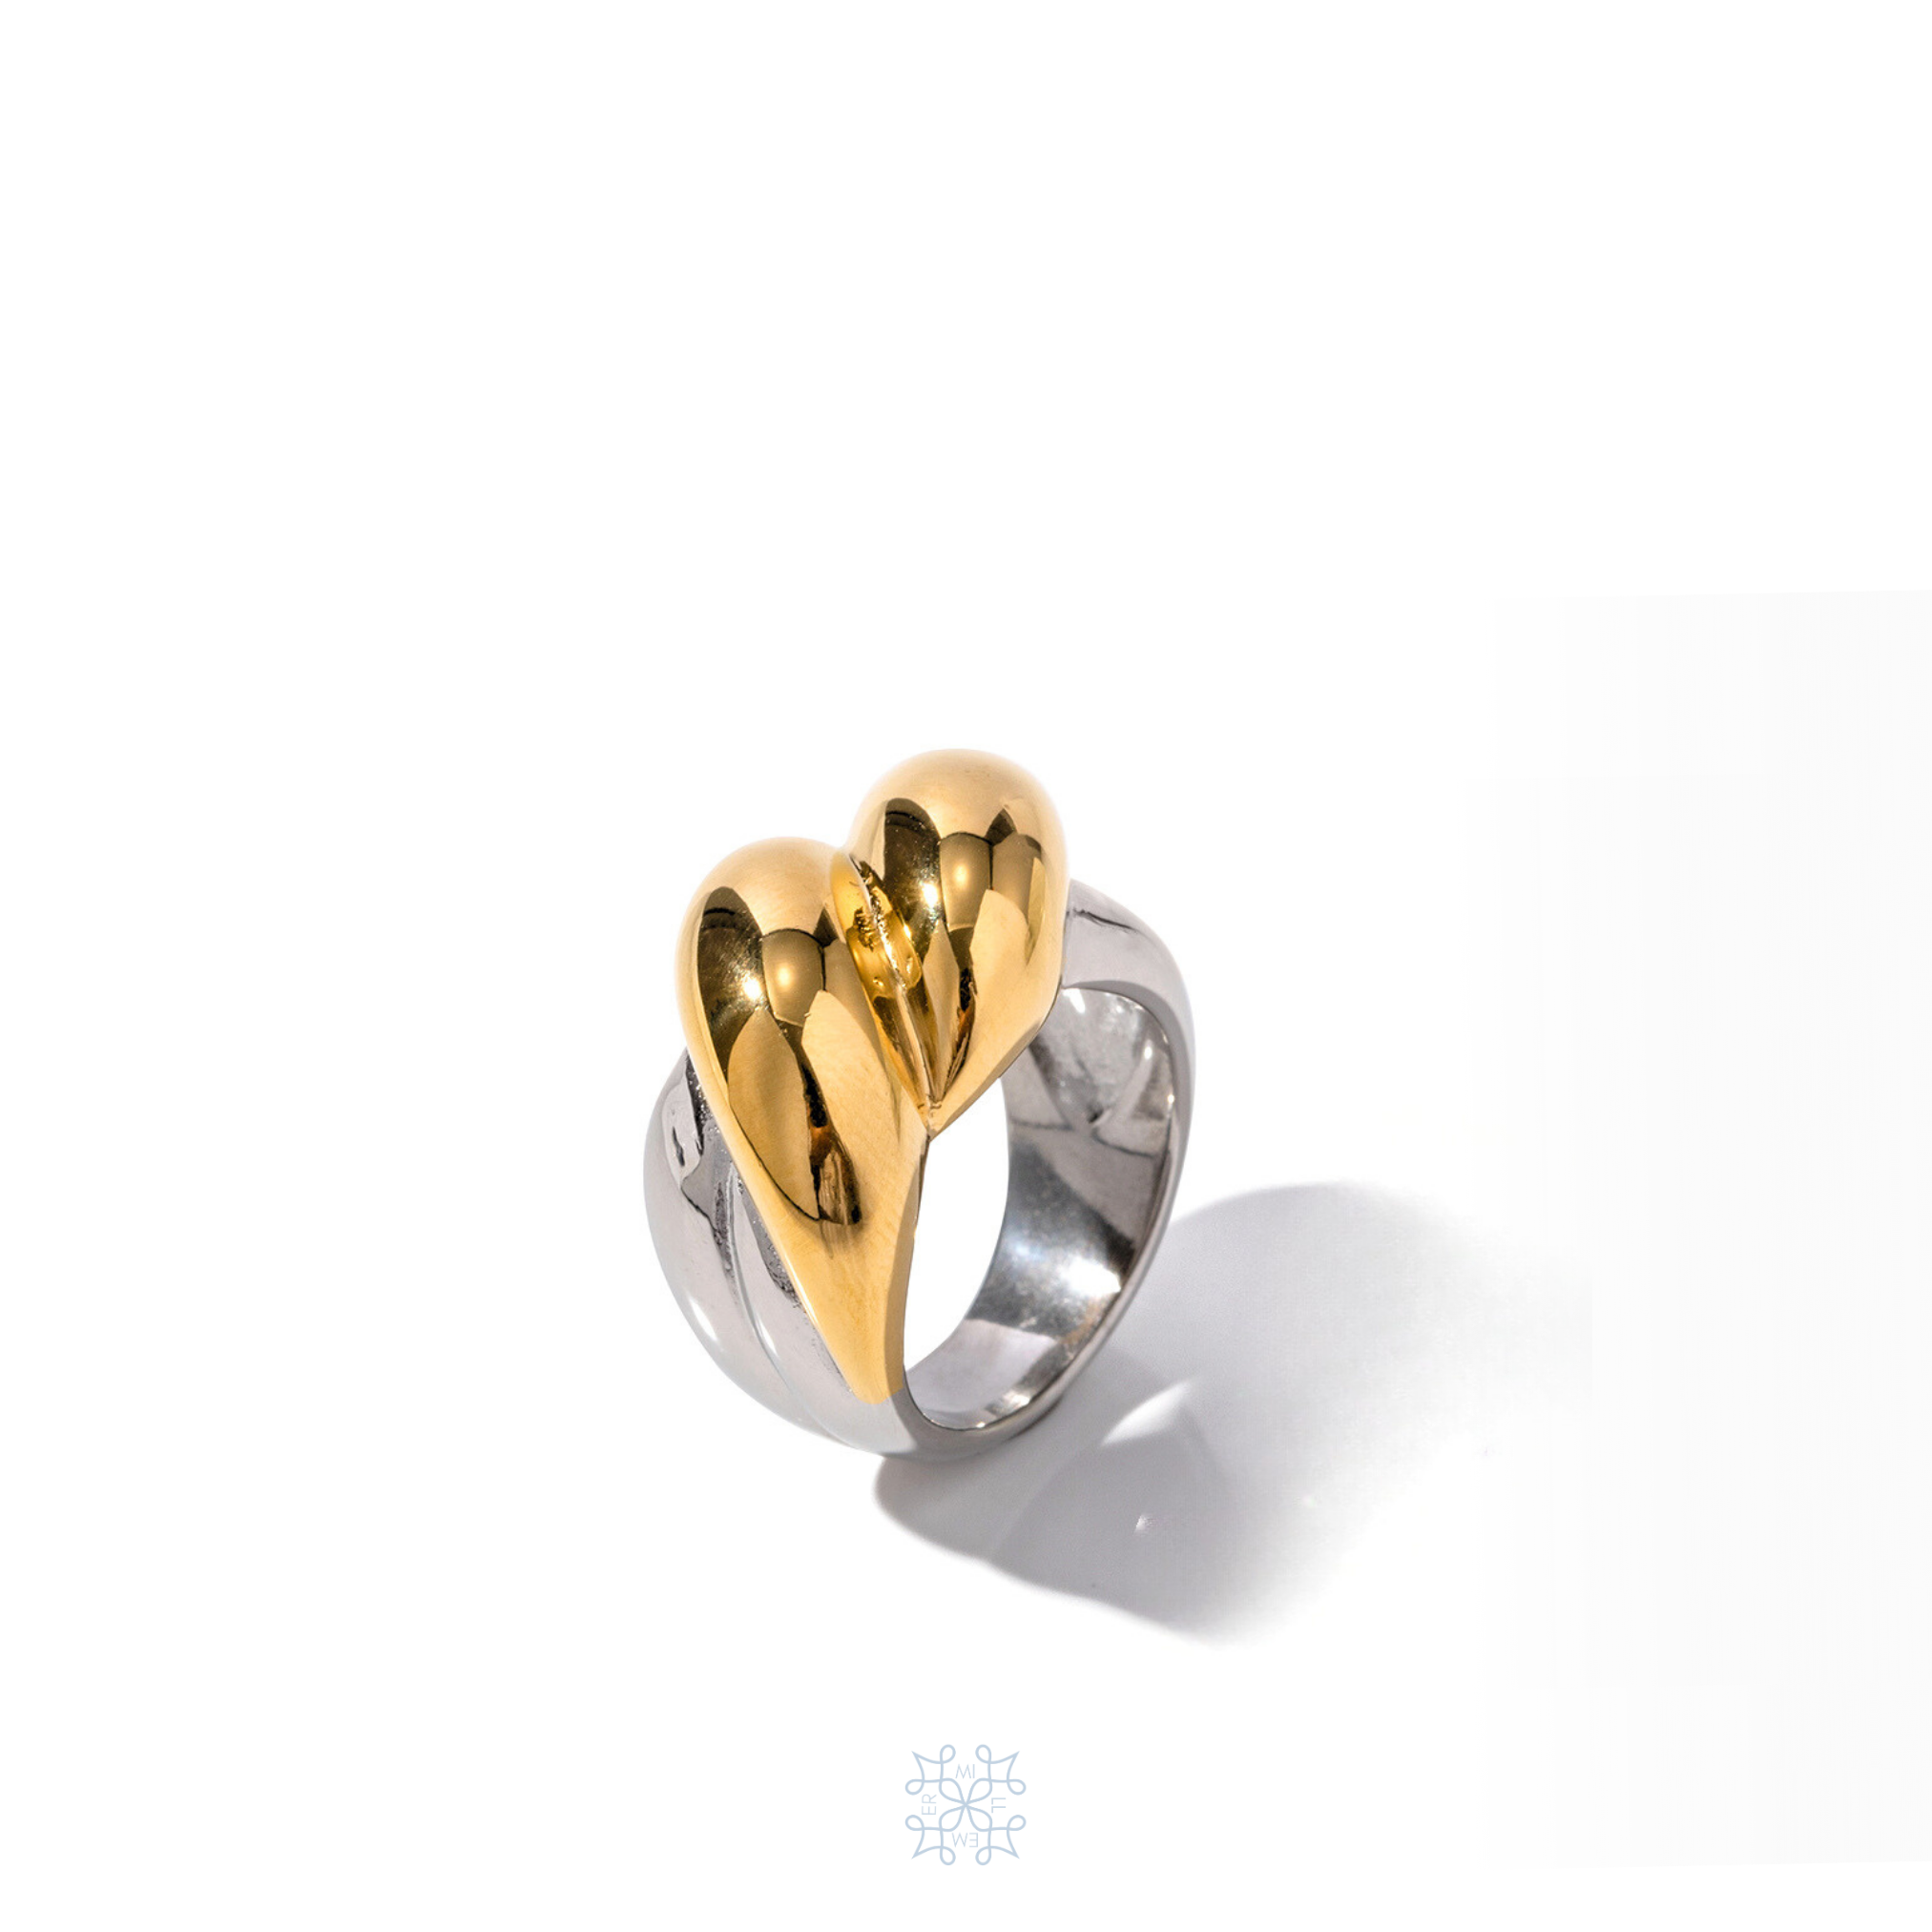 Bold chunky silver and gold ring. Twisted gold part on the top of the ring.